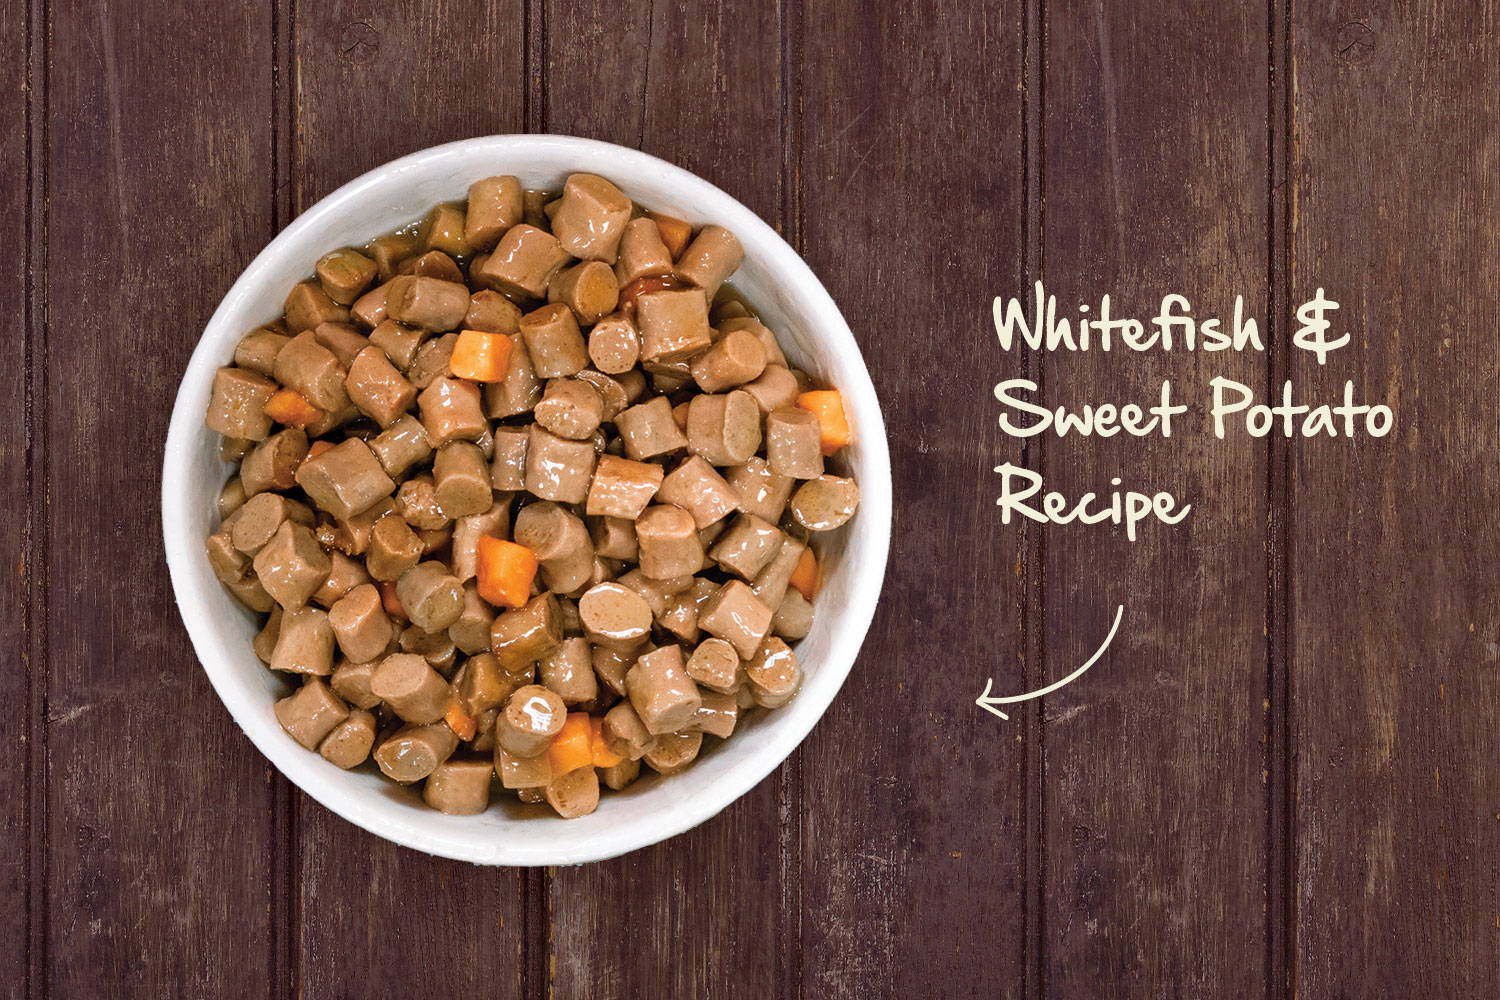 Photograph of Whitefish & Sweet Potato Recipe Stew in a dog bowl